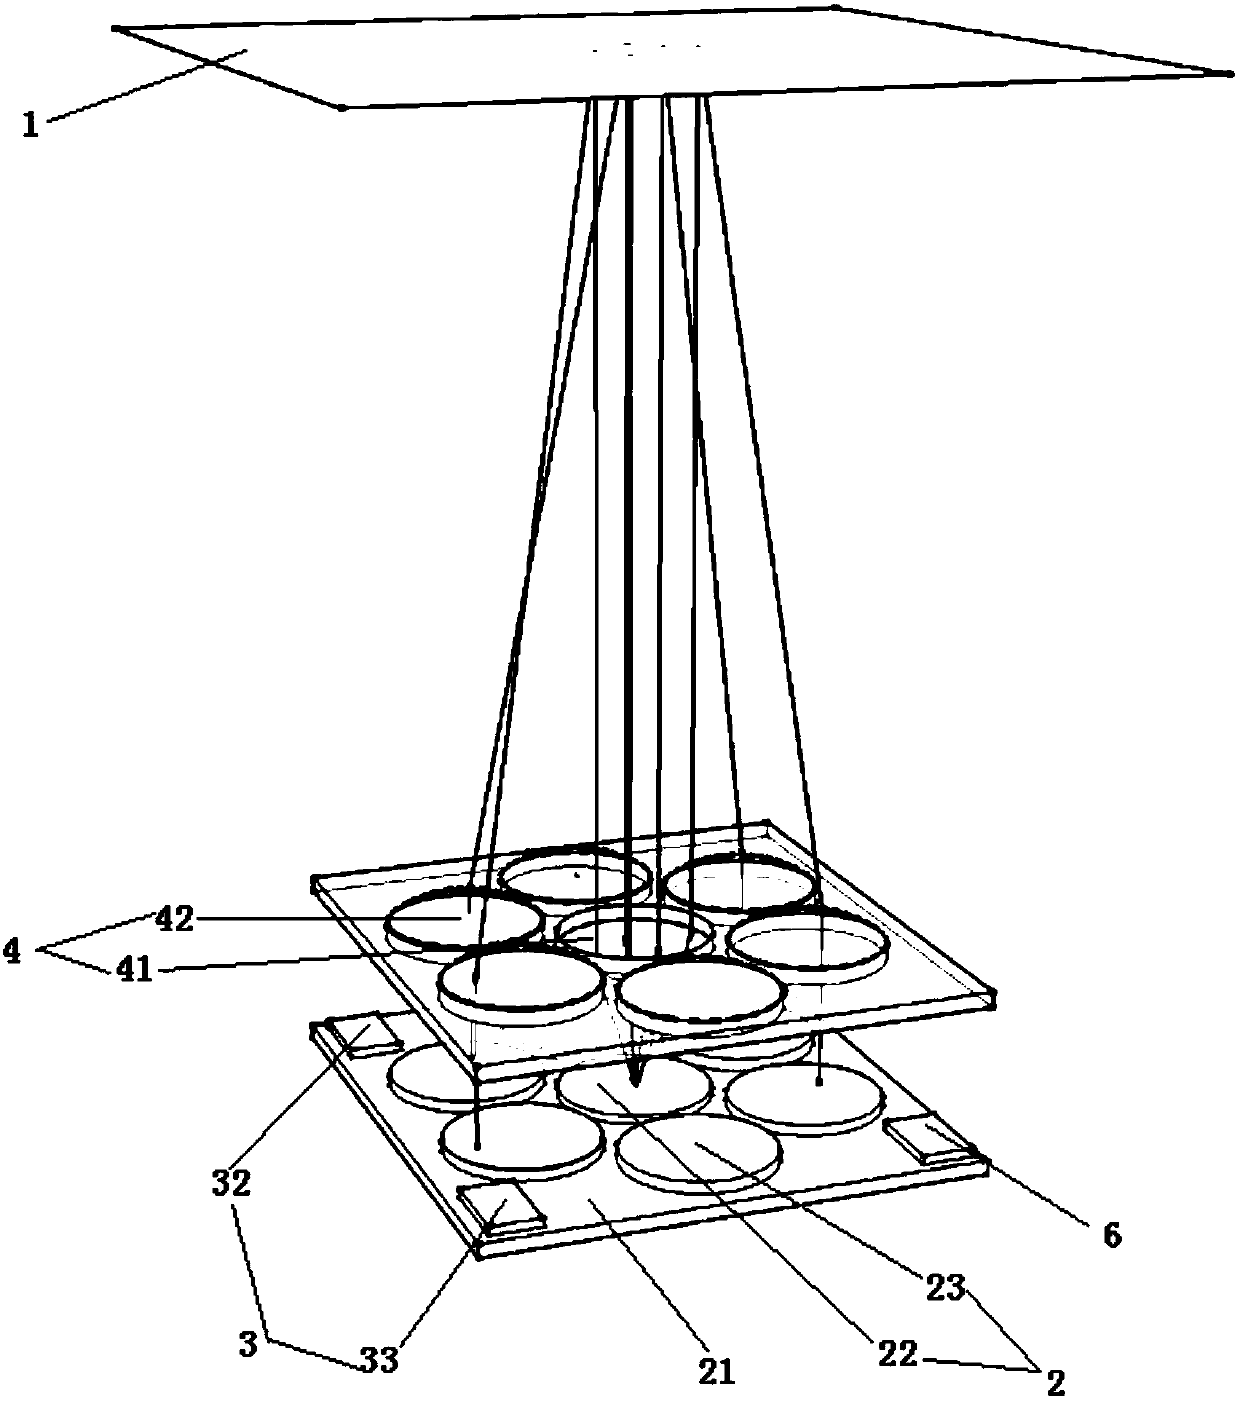 Three-dimensional sensing system based on vertical cavity surface transmission laser device array